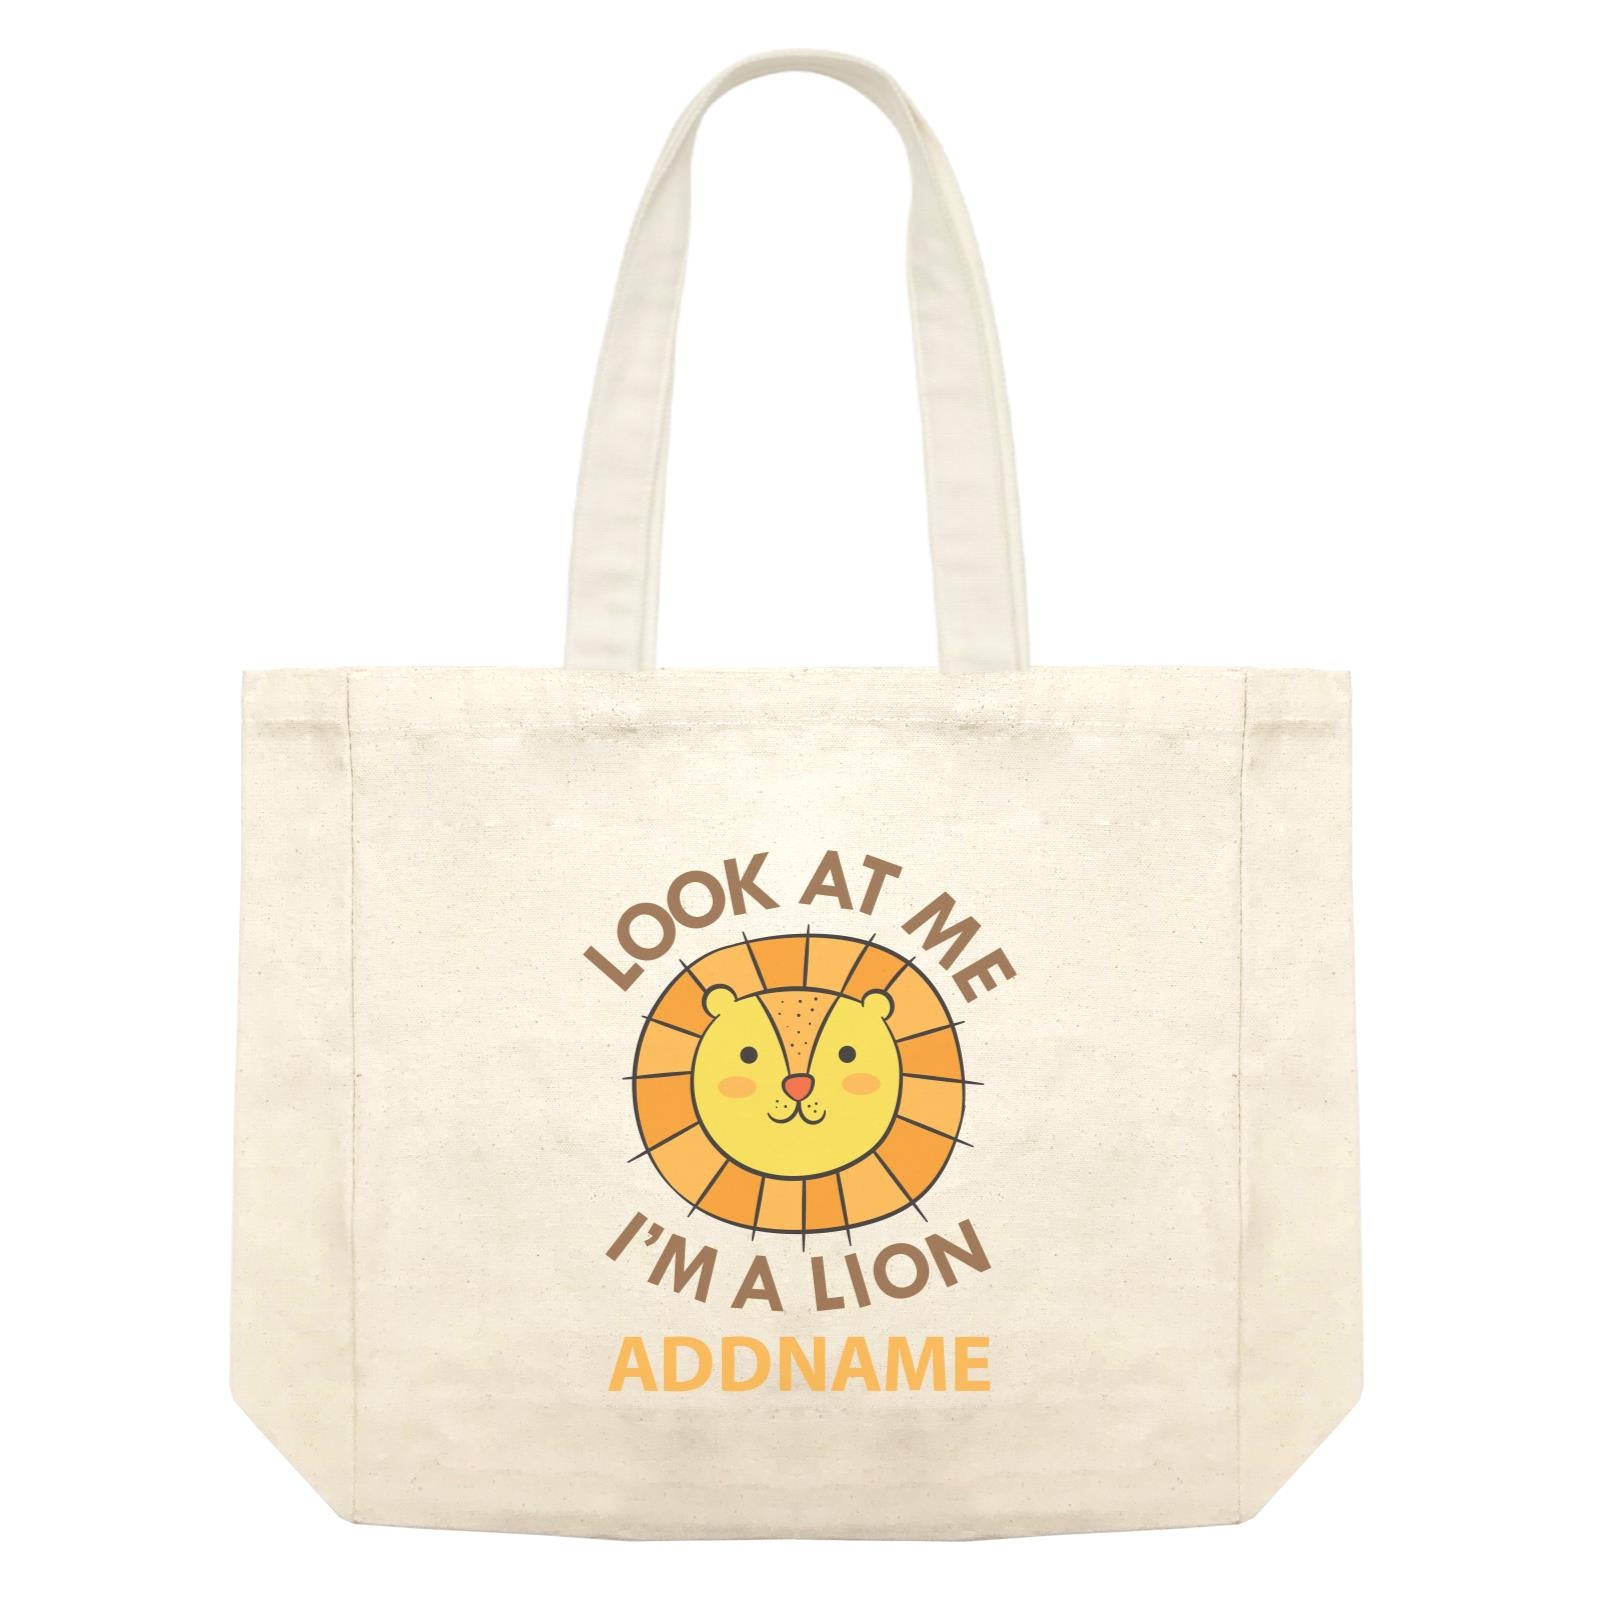 Cool Cute Animals Lion Look At Me I'm A Lion Addname Shopping Bag